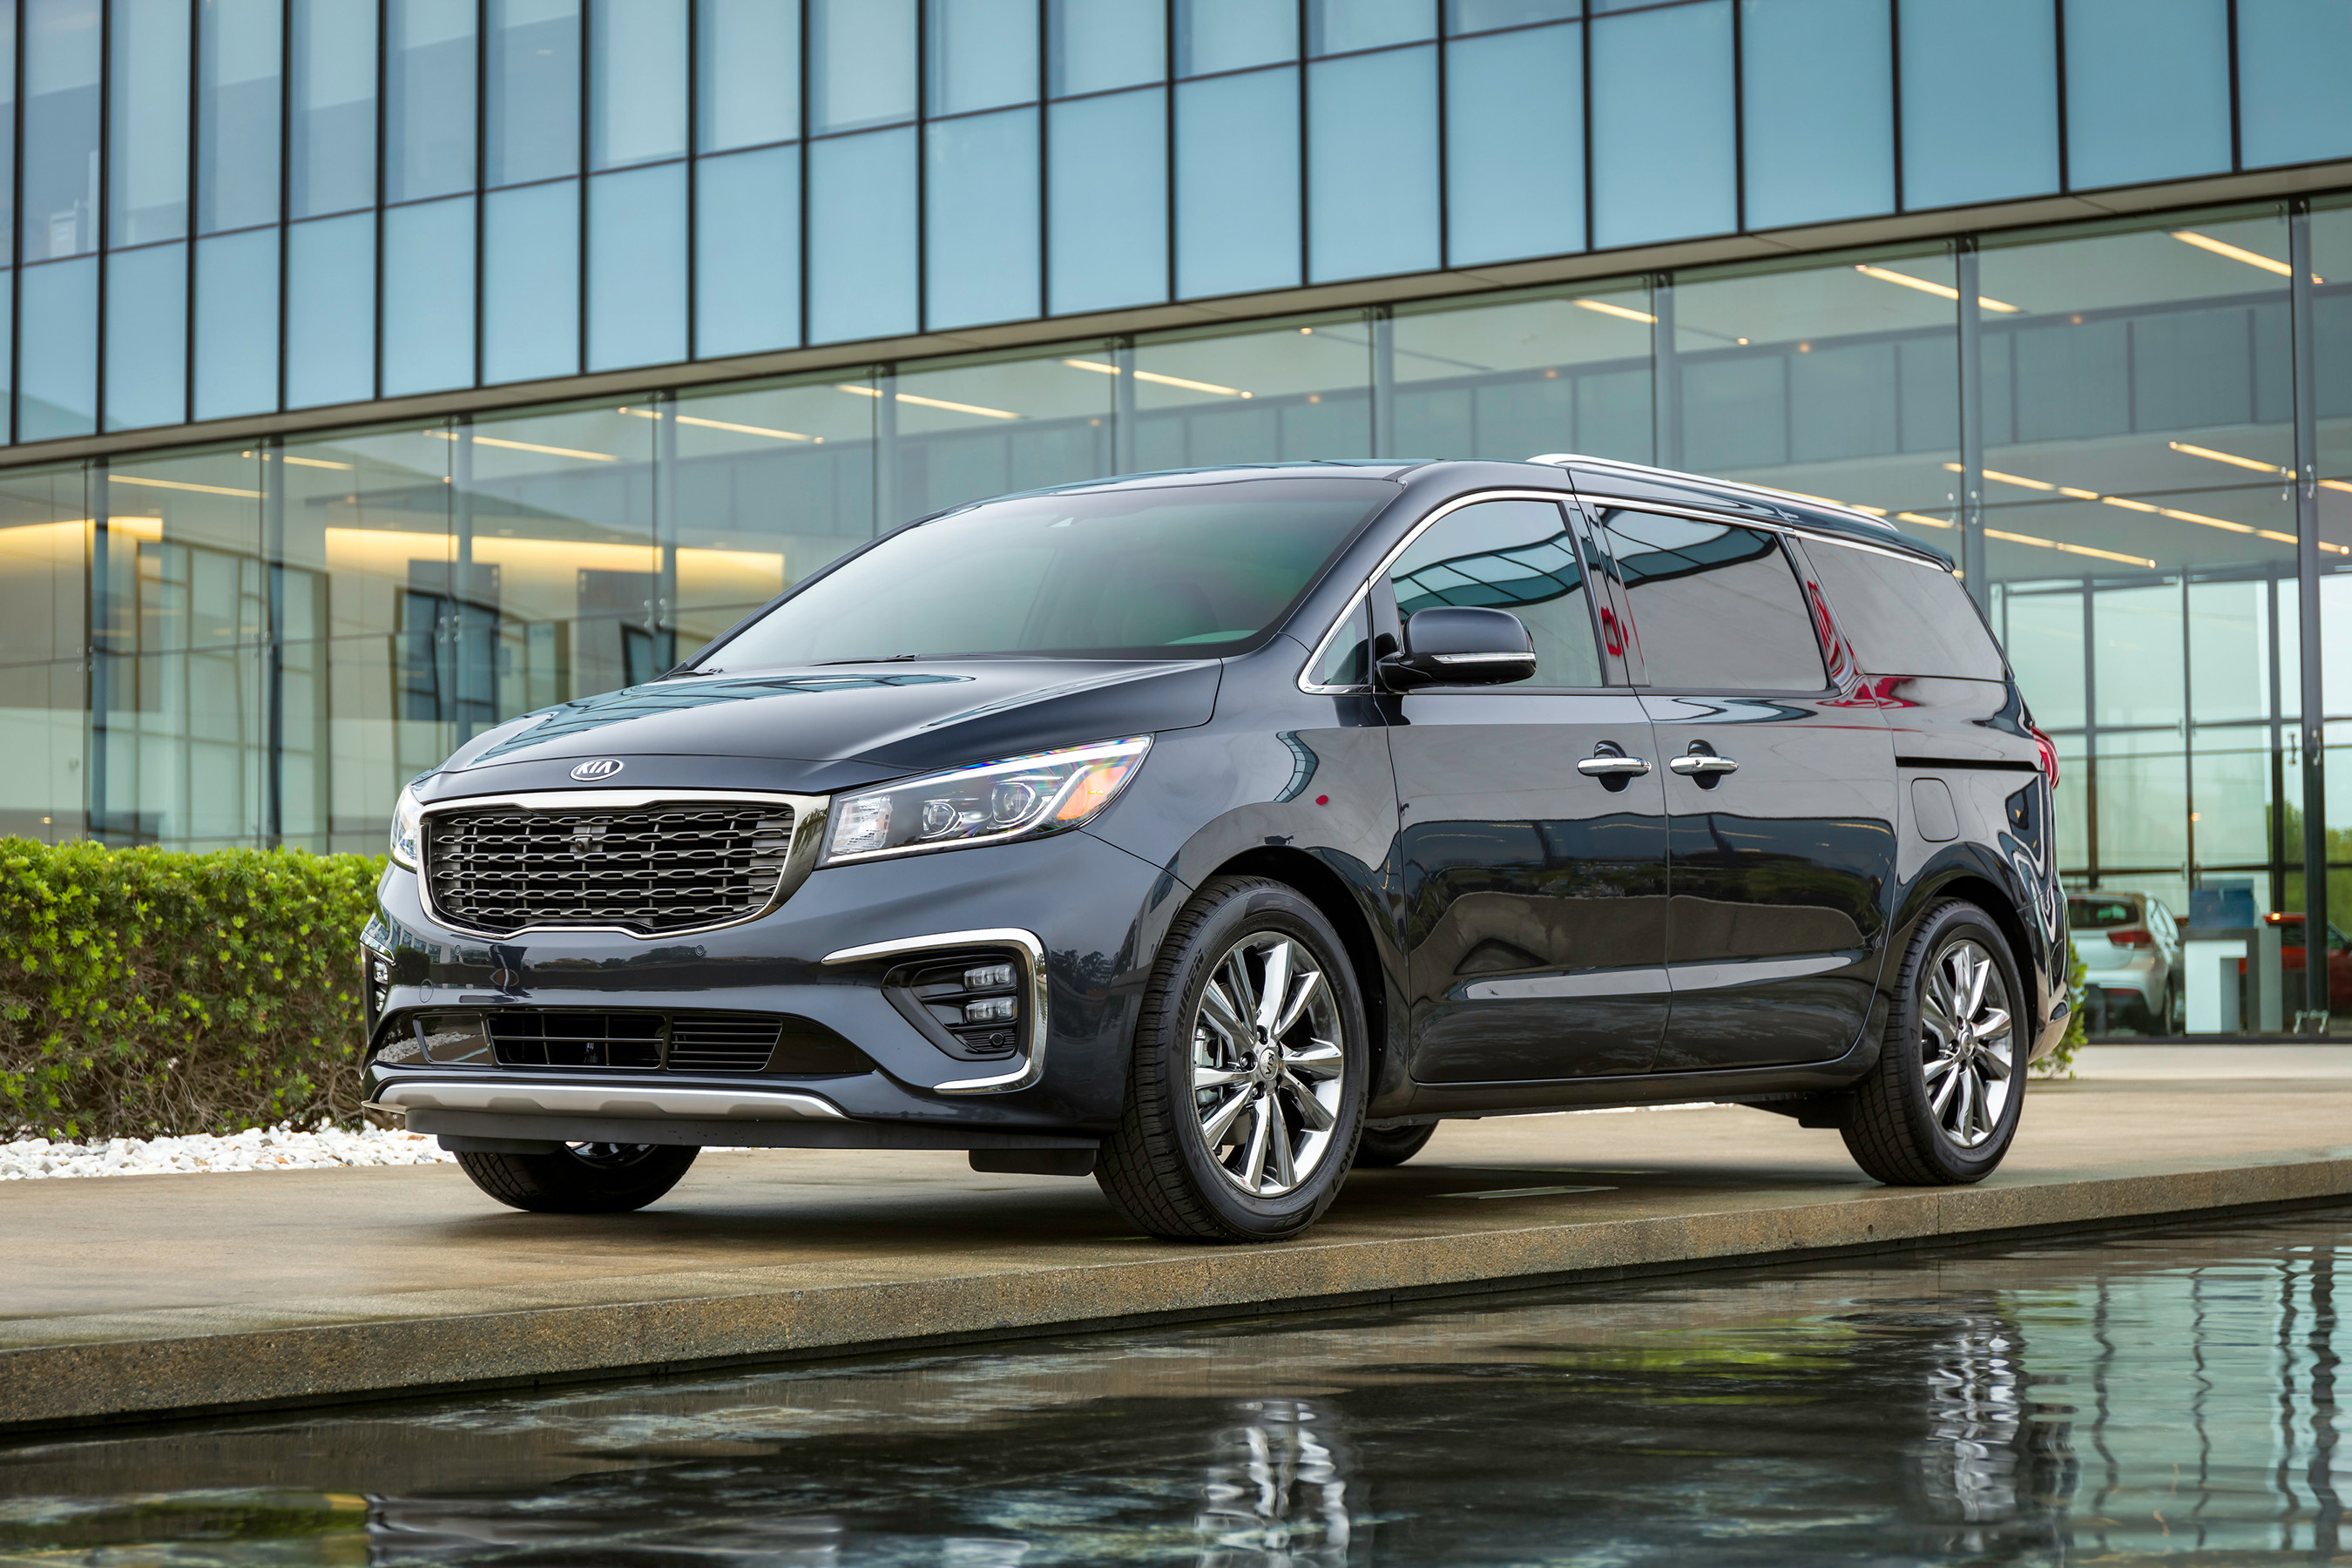 The refreshed 2019 Kia Sedona stays true to its CUV-like proportions, however, visual enhancements all around give the vehicle a bolder appearance.